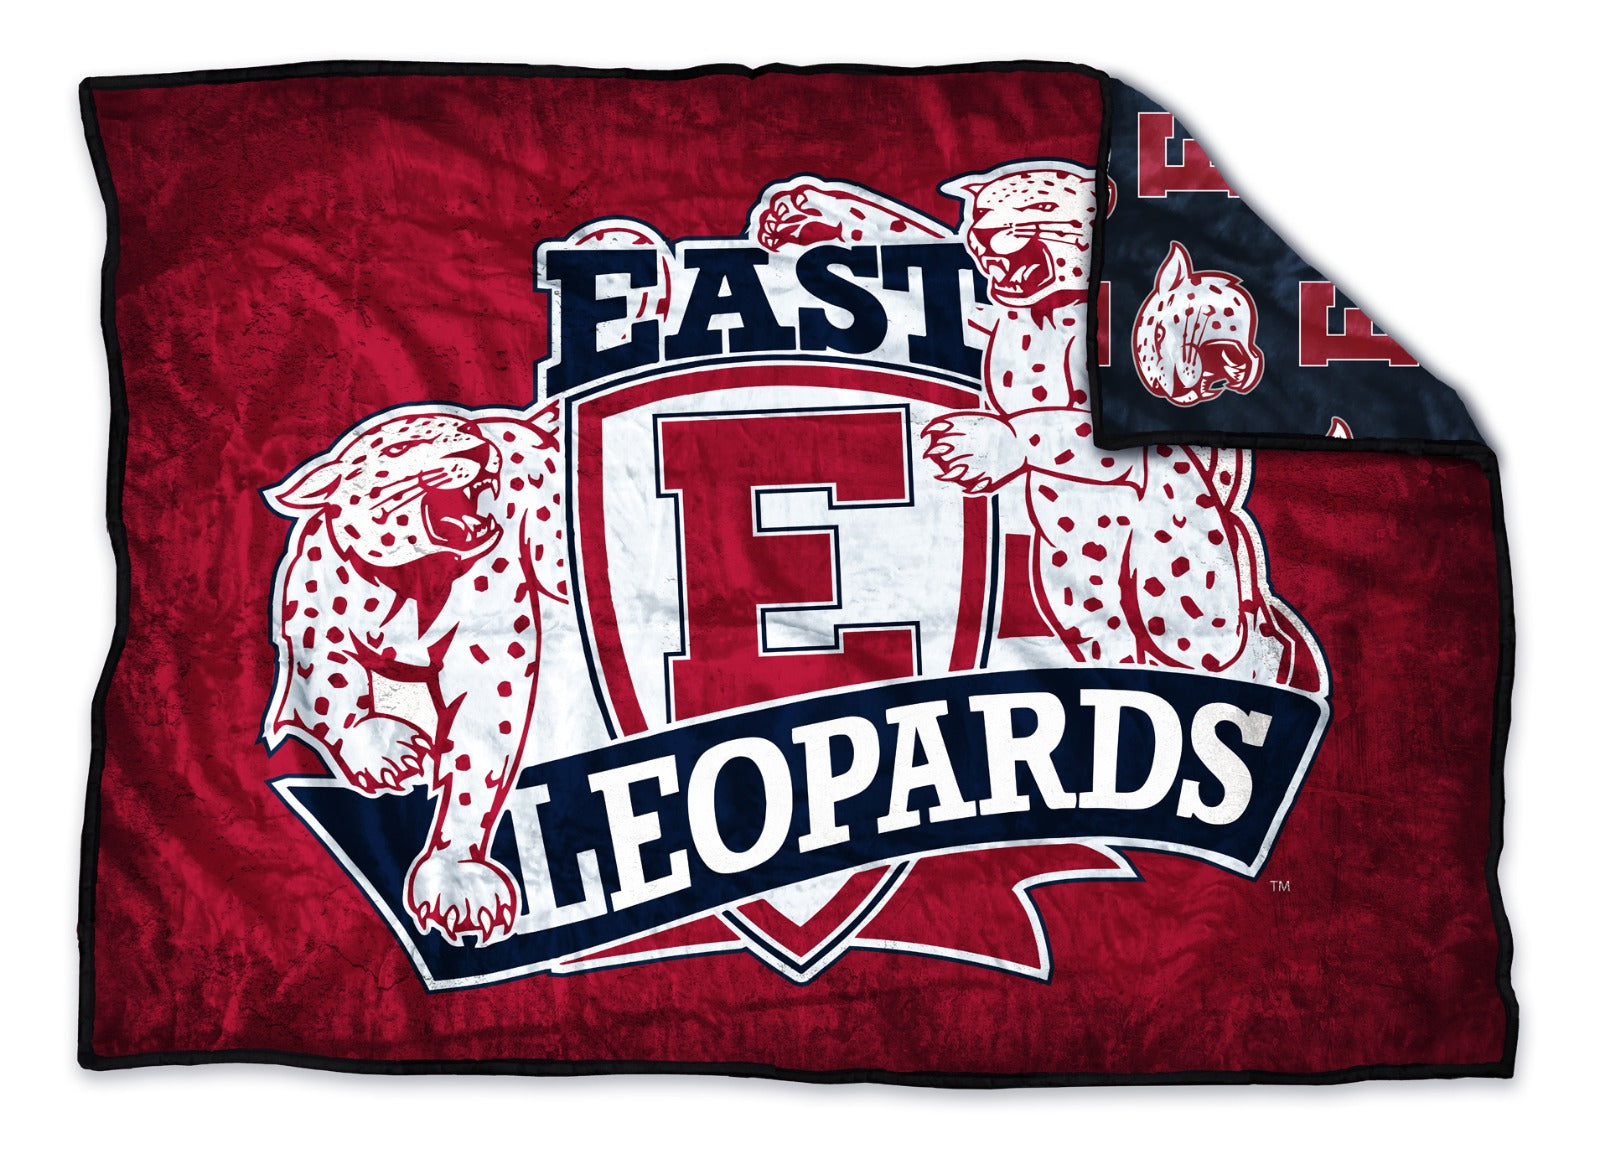 East High Leopards